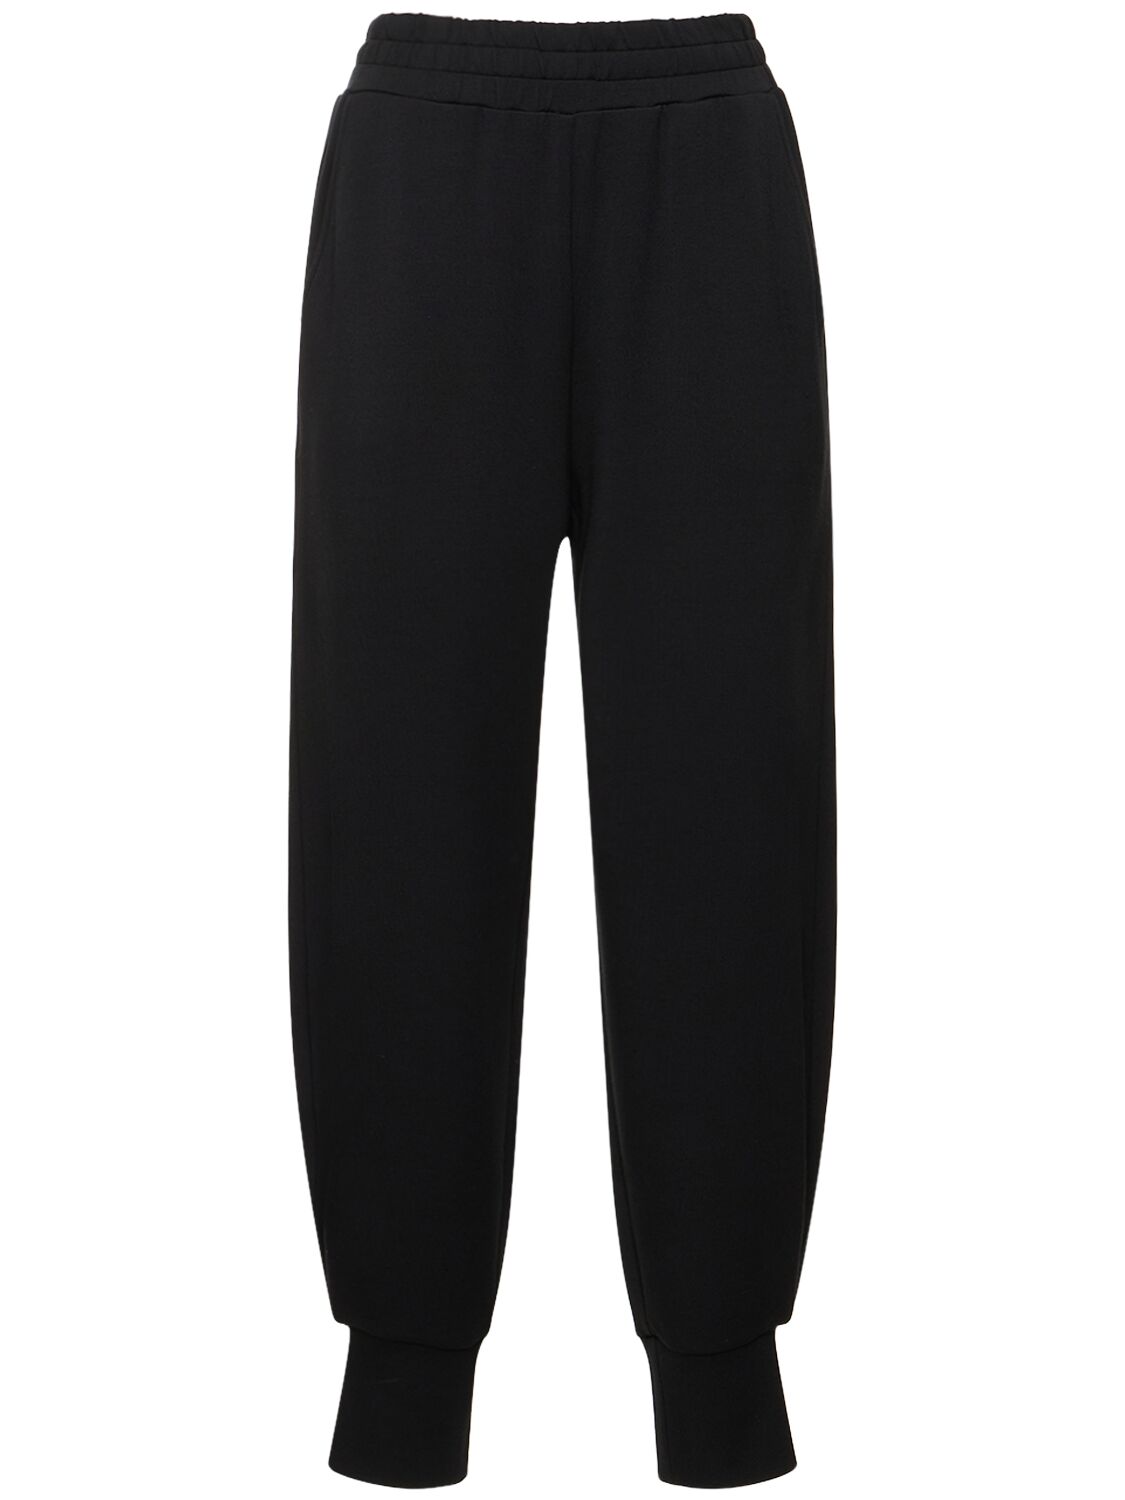 Varley The Relaxed High Waist Sweatpants In Black